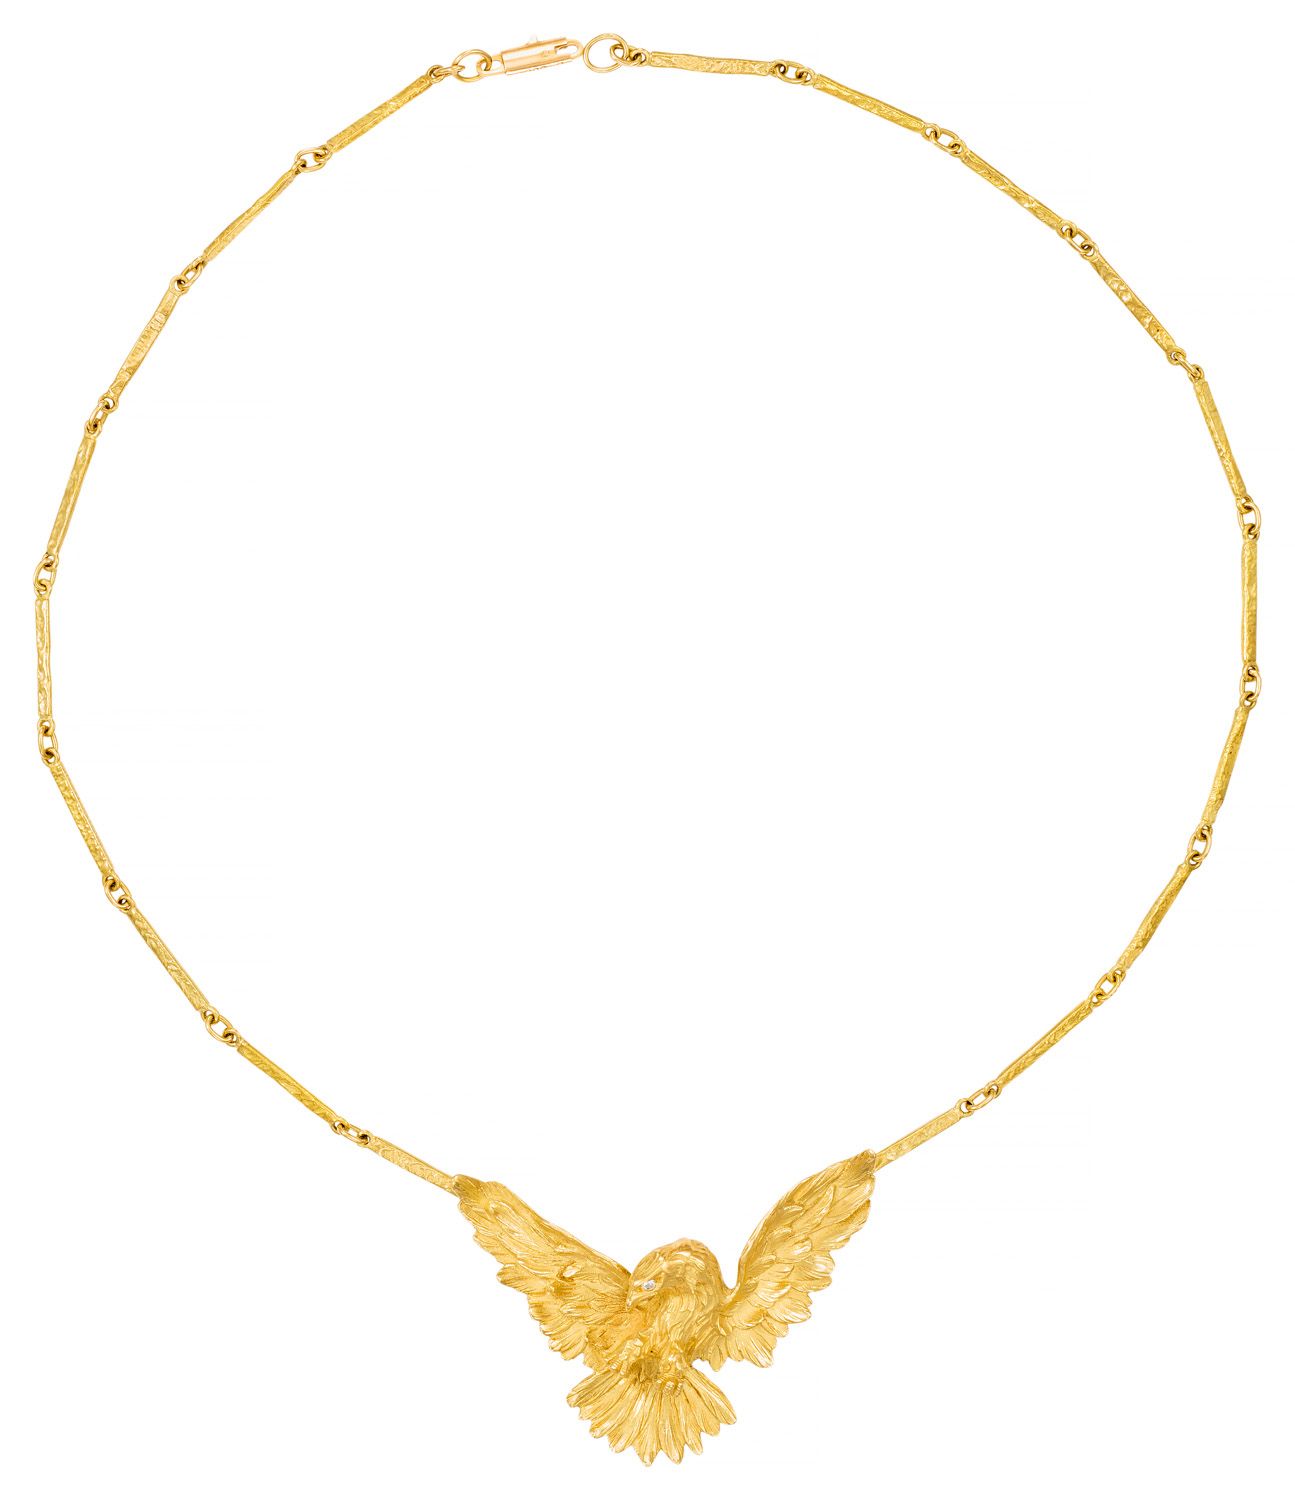 COLLIER Yellow gold necklace holding an eagle, his eye in diamond